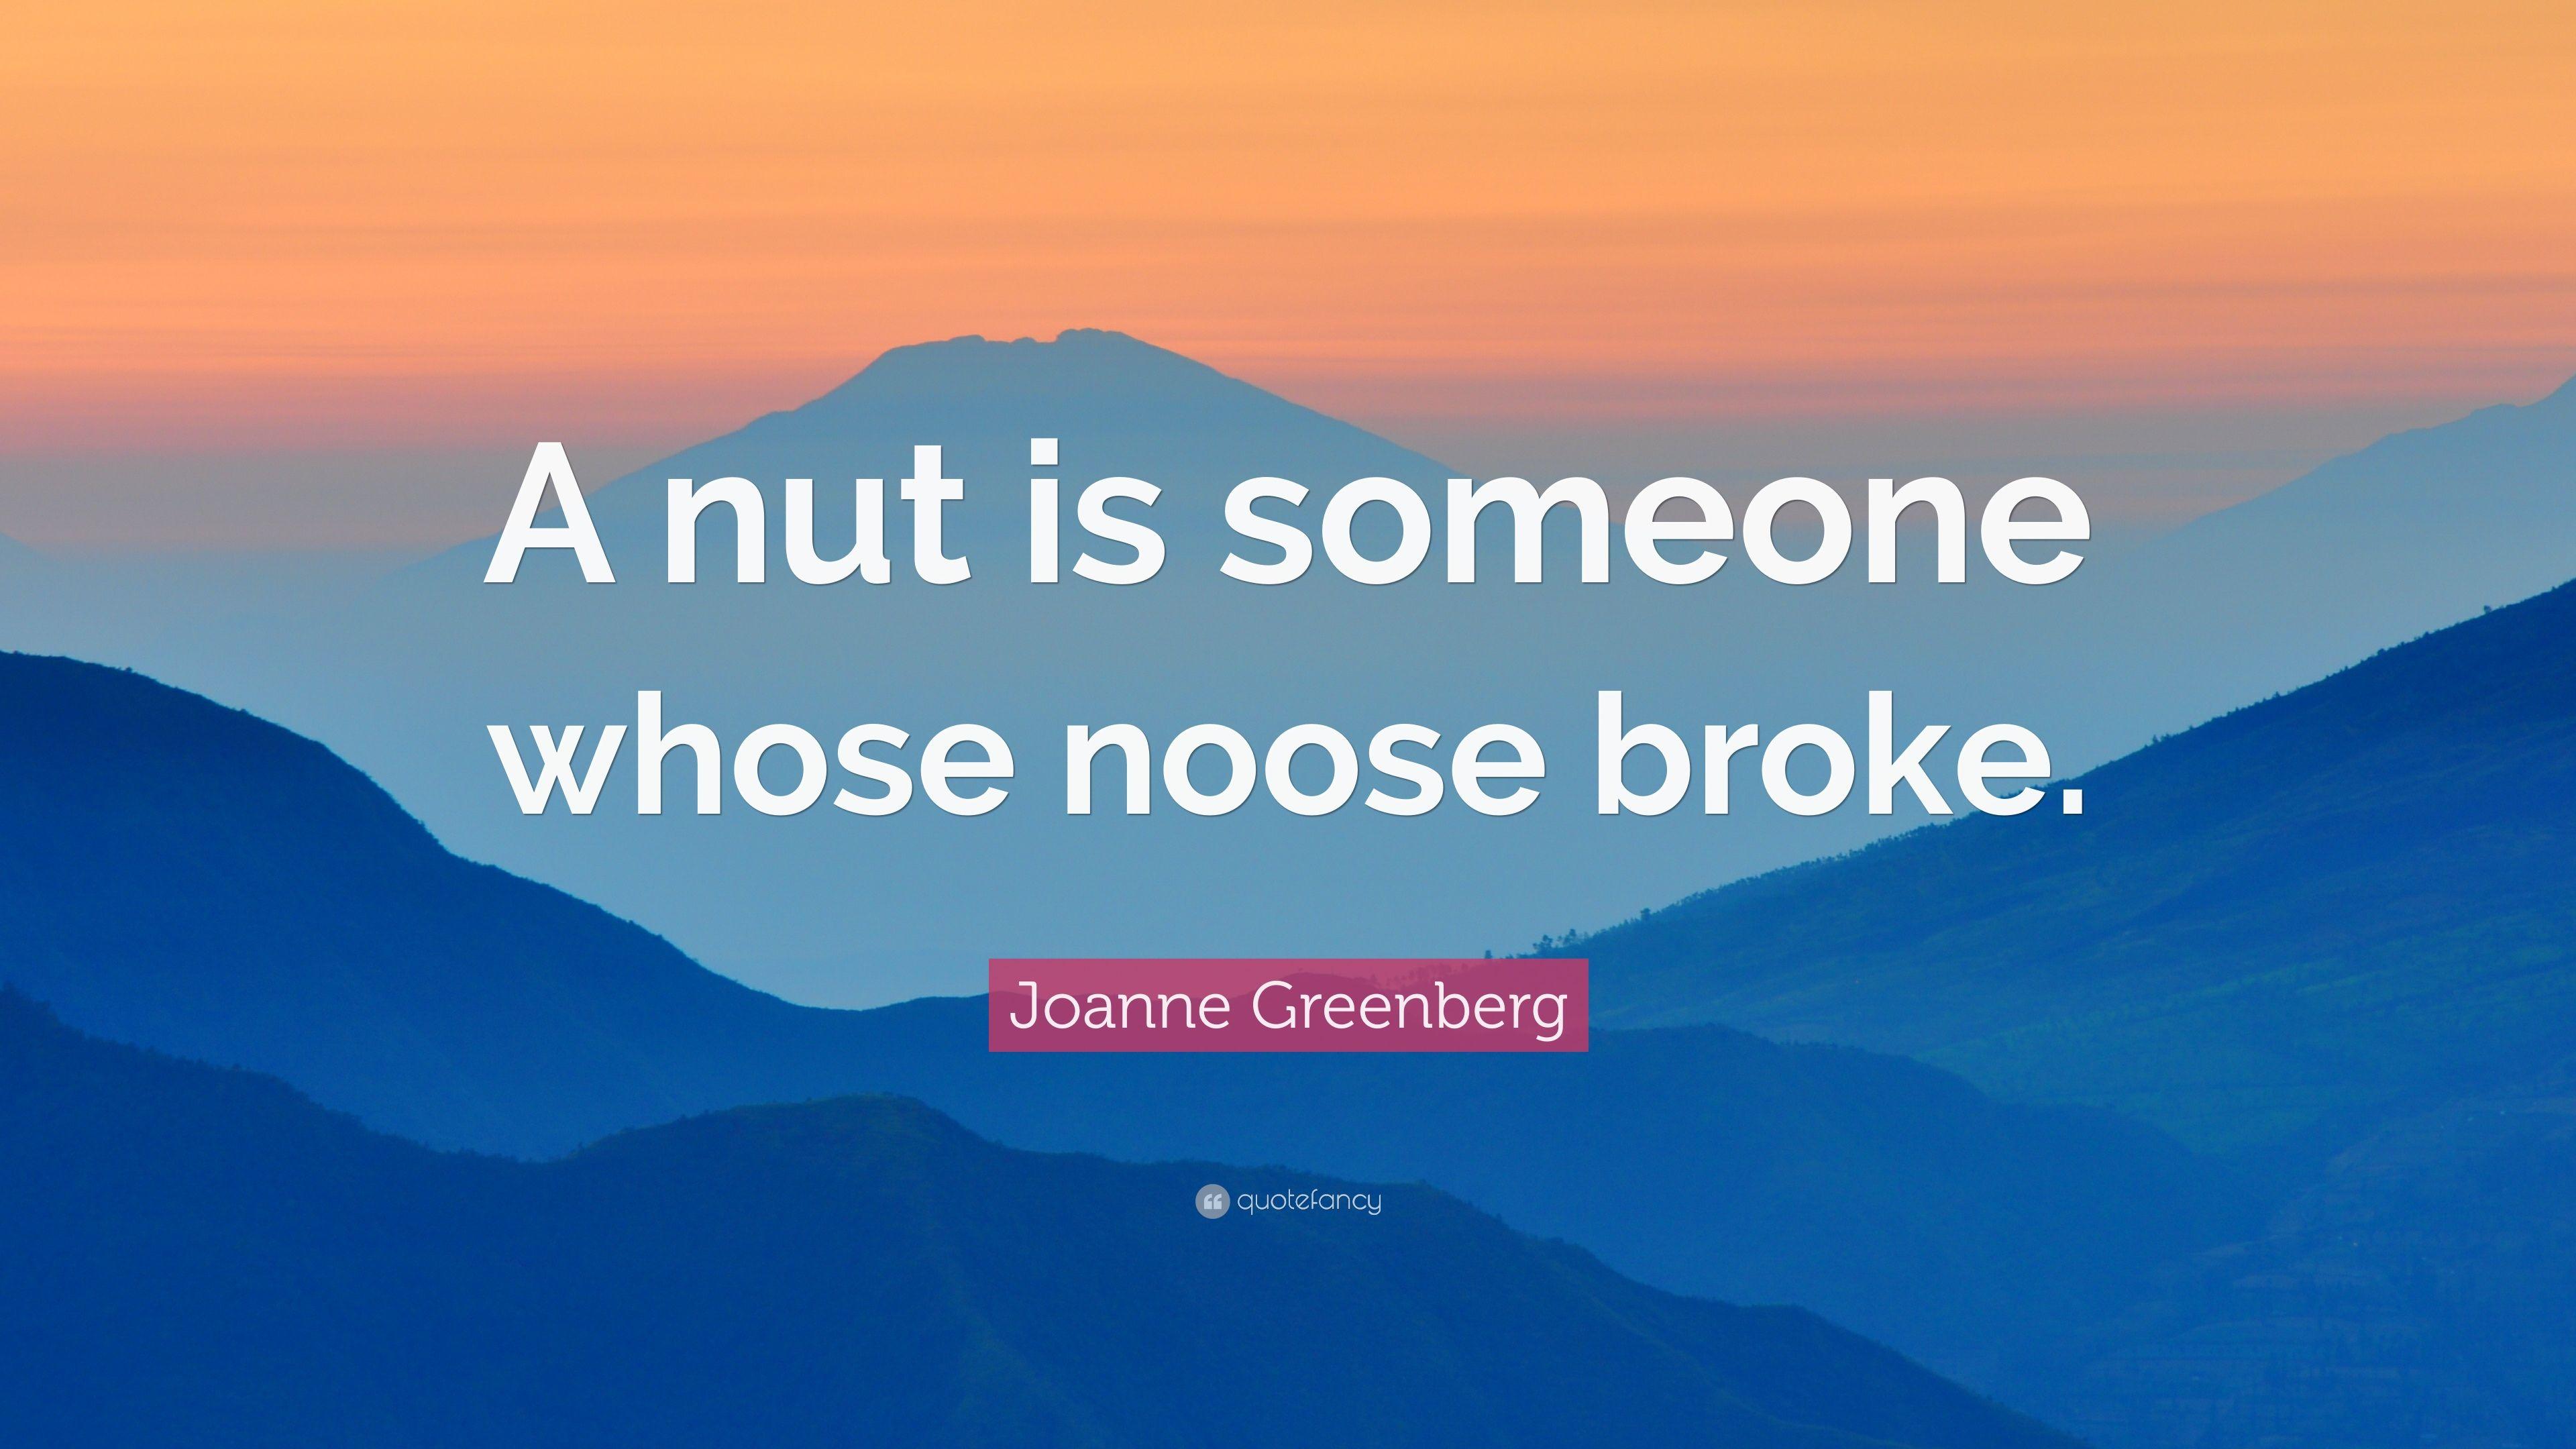 Joanne Greenberg Quote: “A nut is someone whose noose broke.” 5